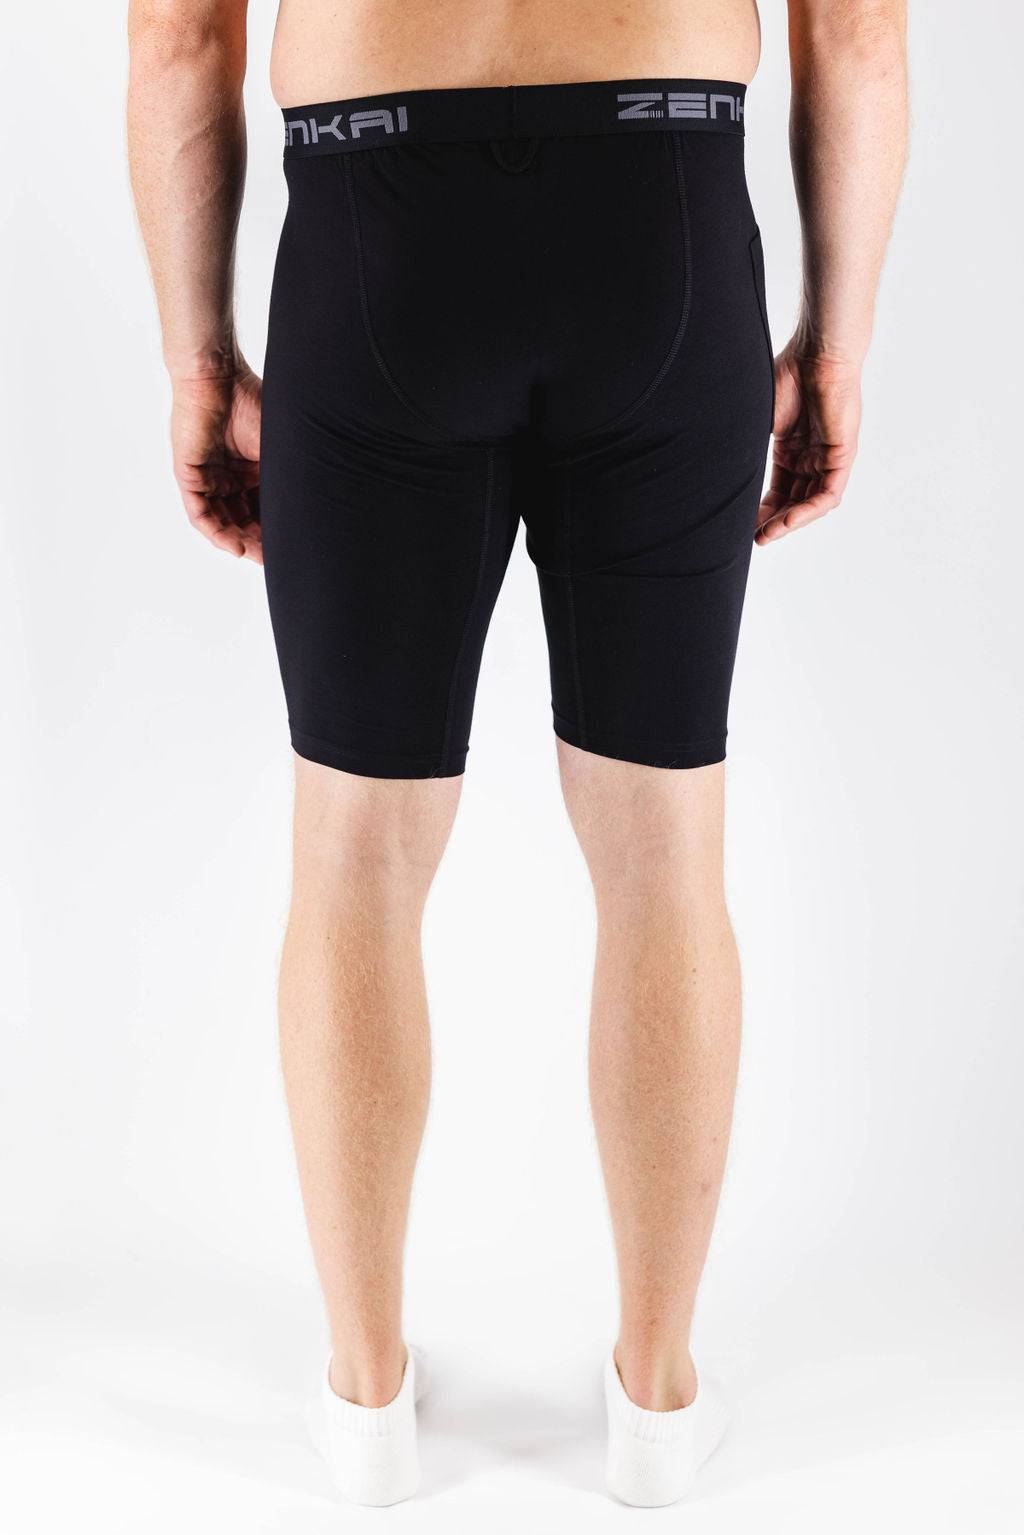 Compression Pants, Waist to Above-knee